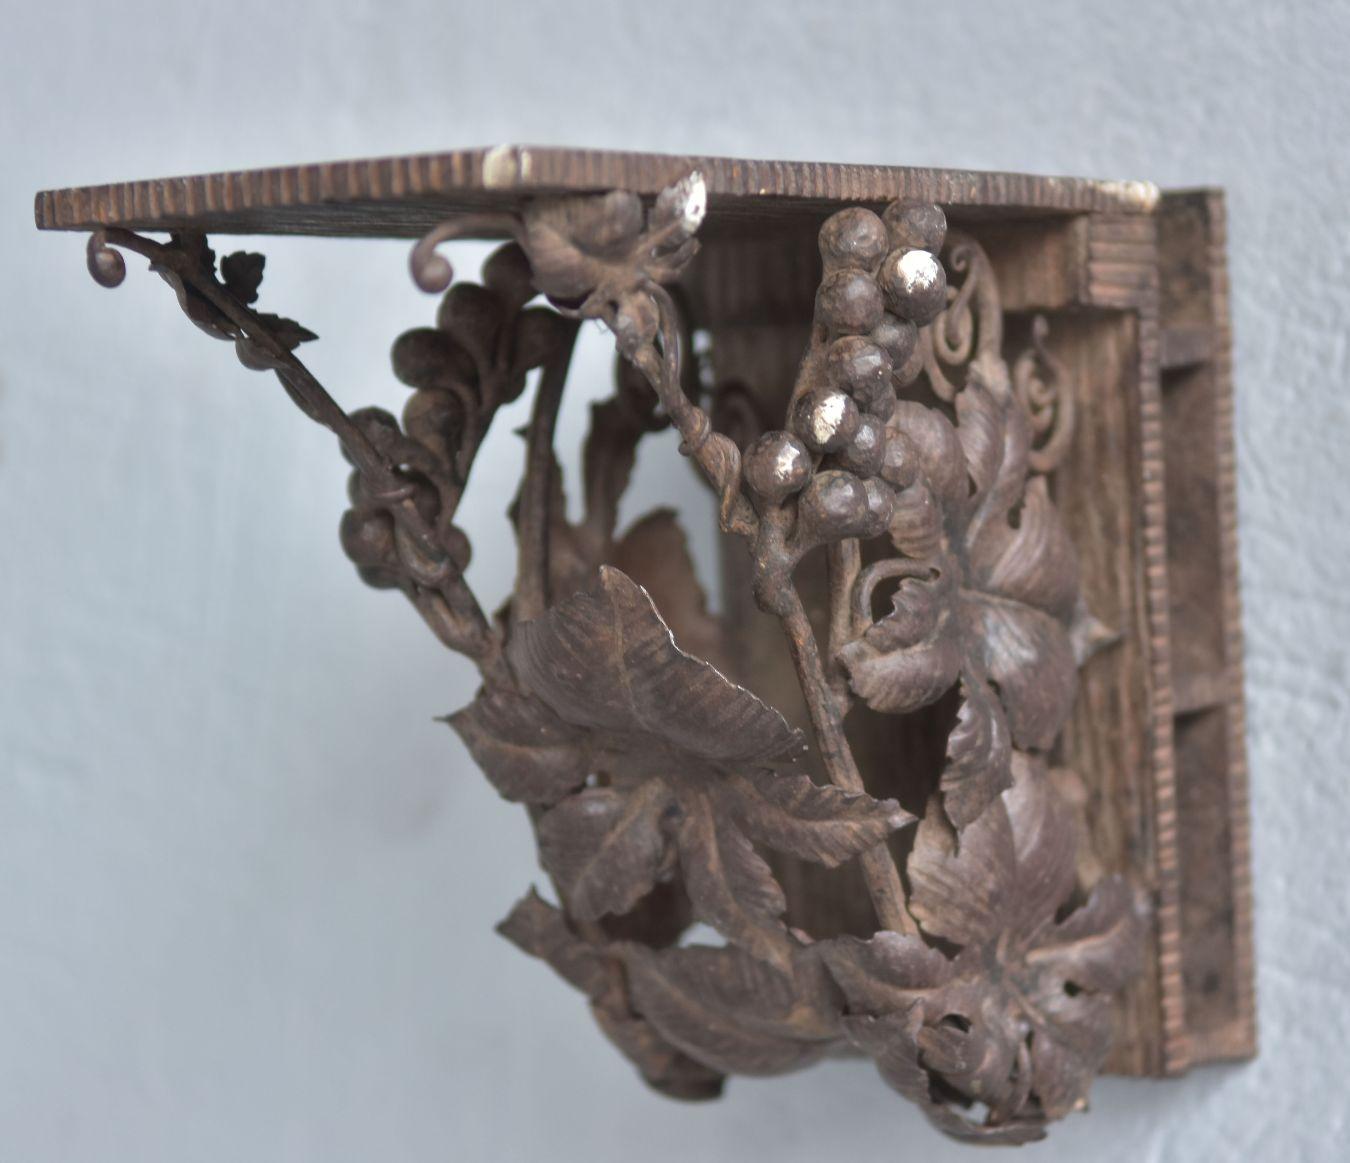 Small wrought iron harness Art Deco period, 1930, decorated with hammered and stamped iron vines and grapes.